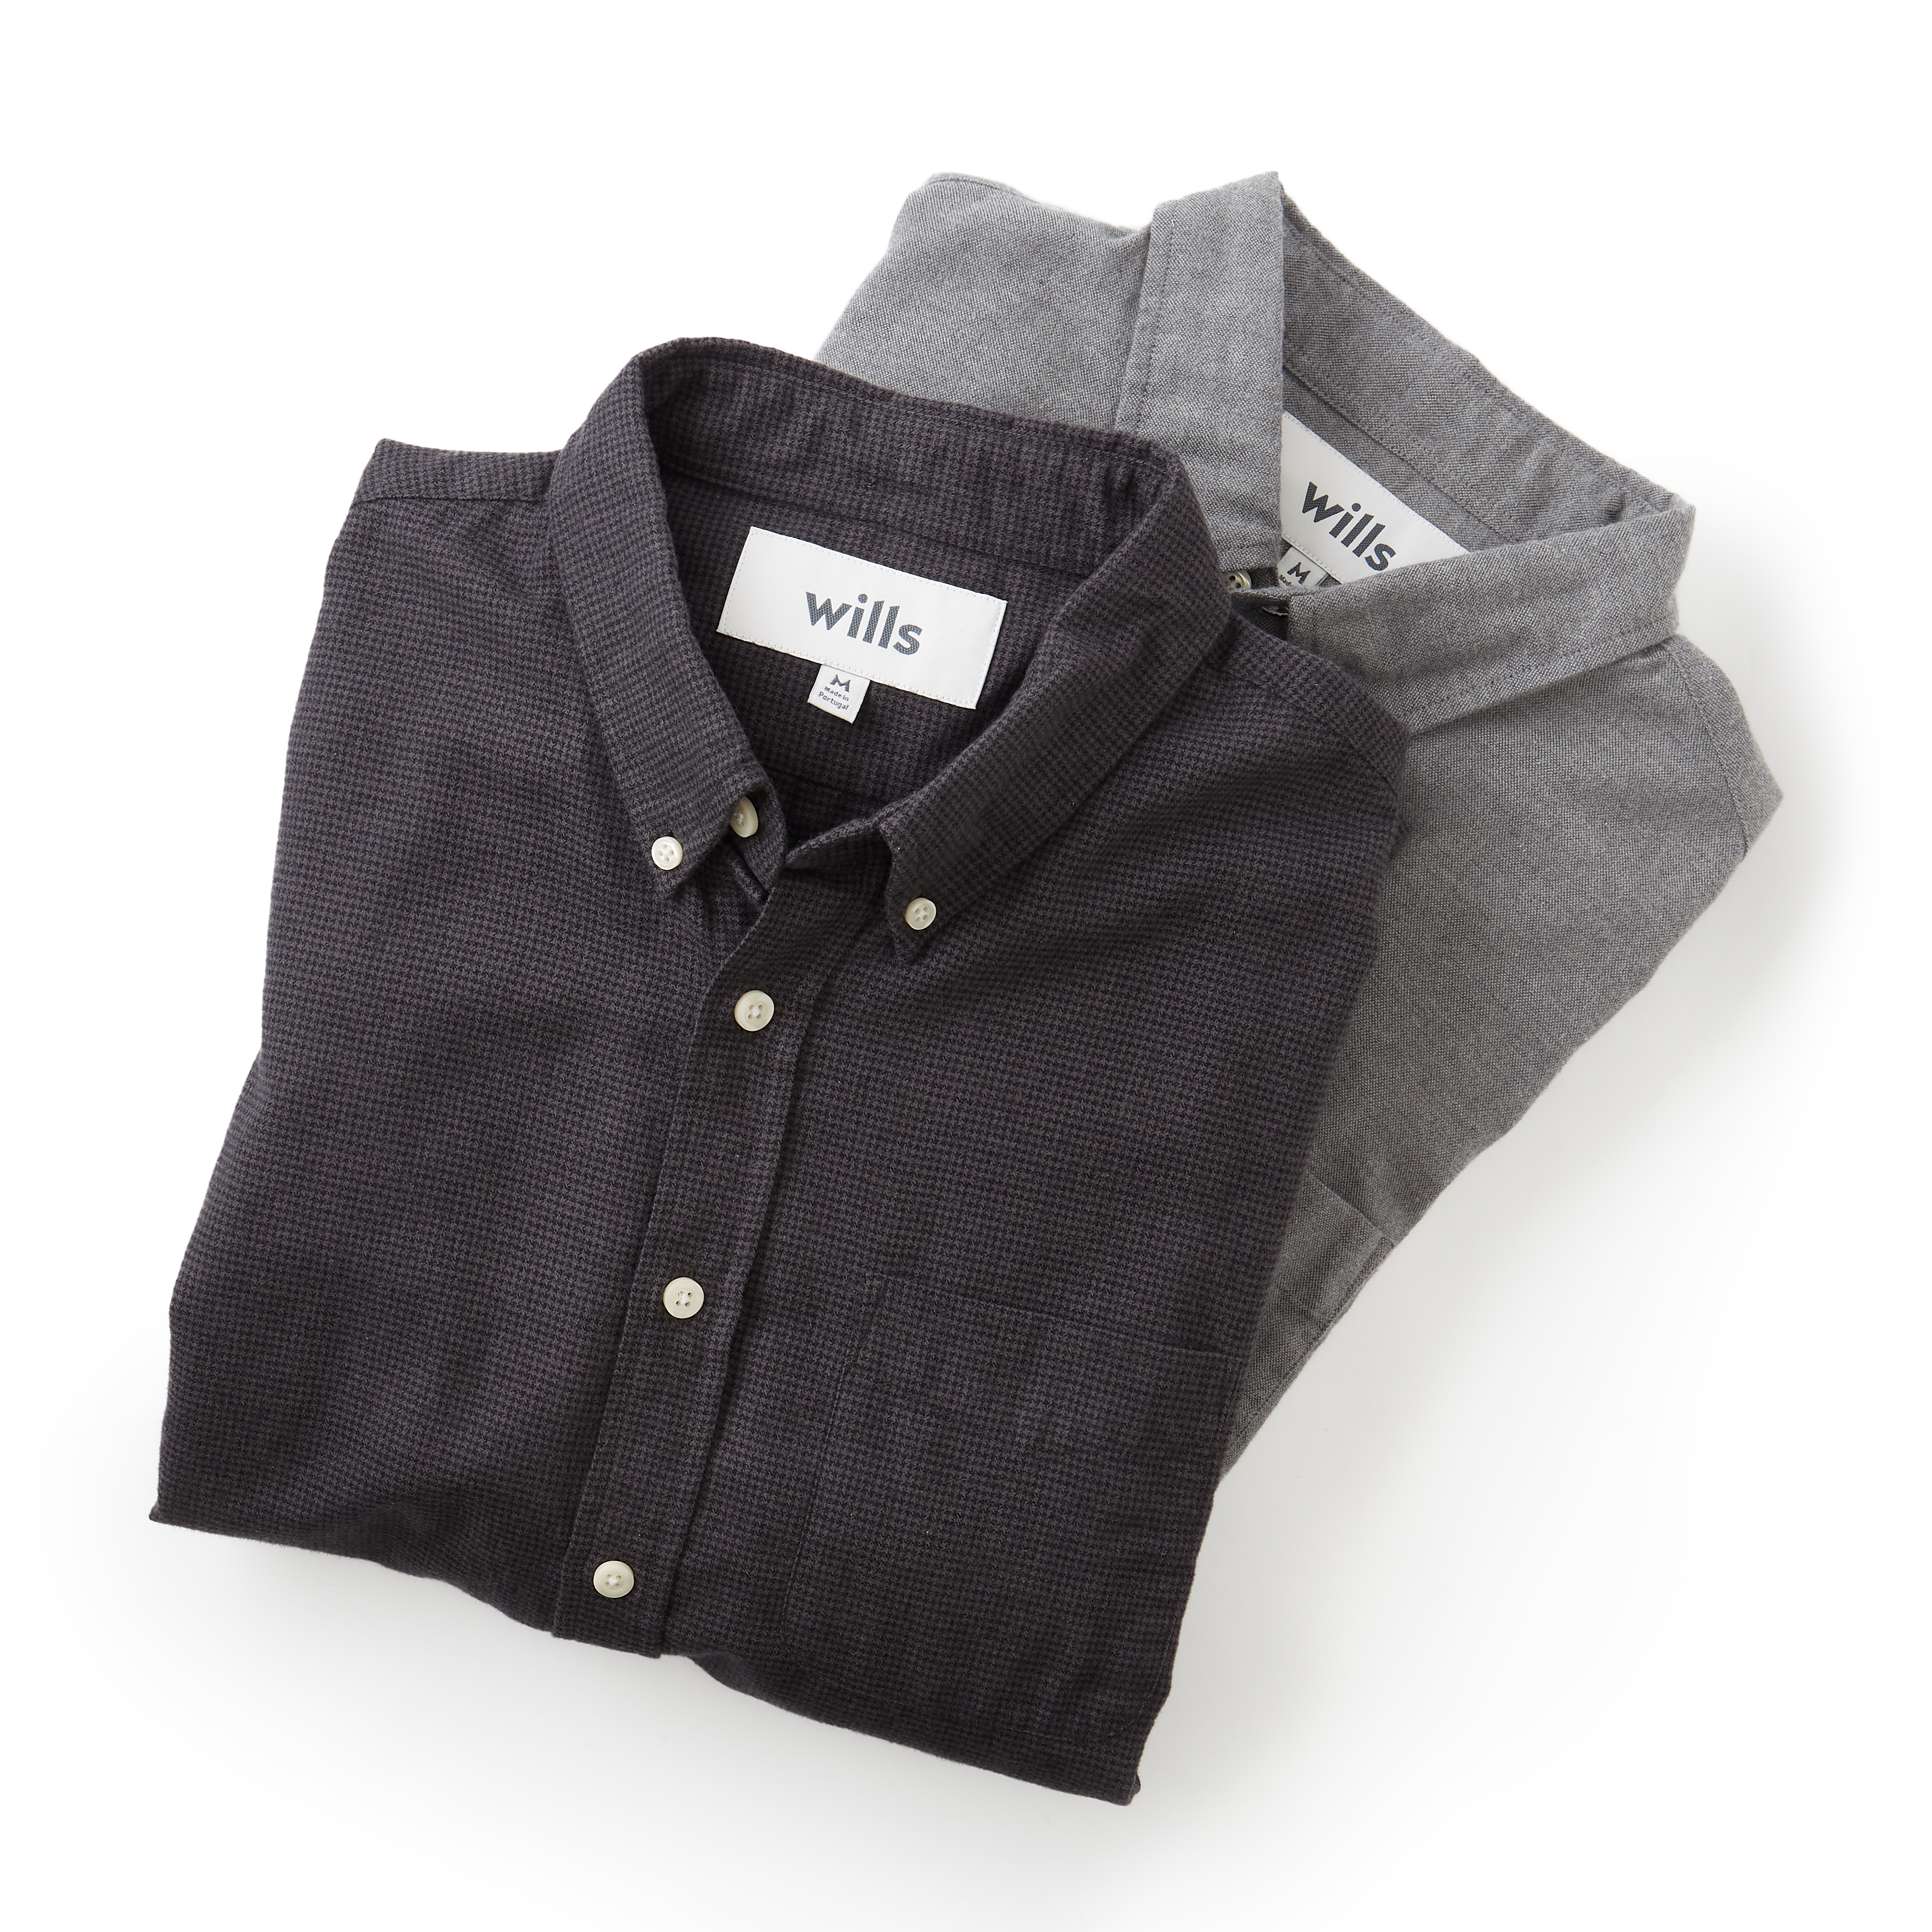 Wills Brushed Cotton Oxford - Charcoal Black Houndstooth | Shirts